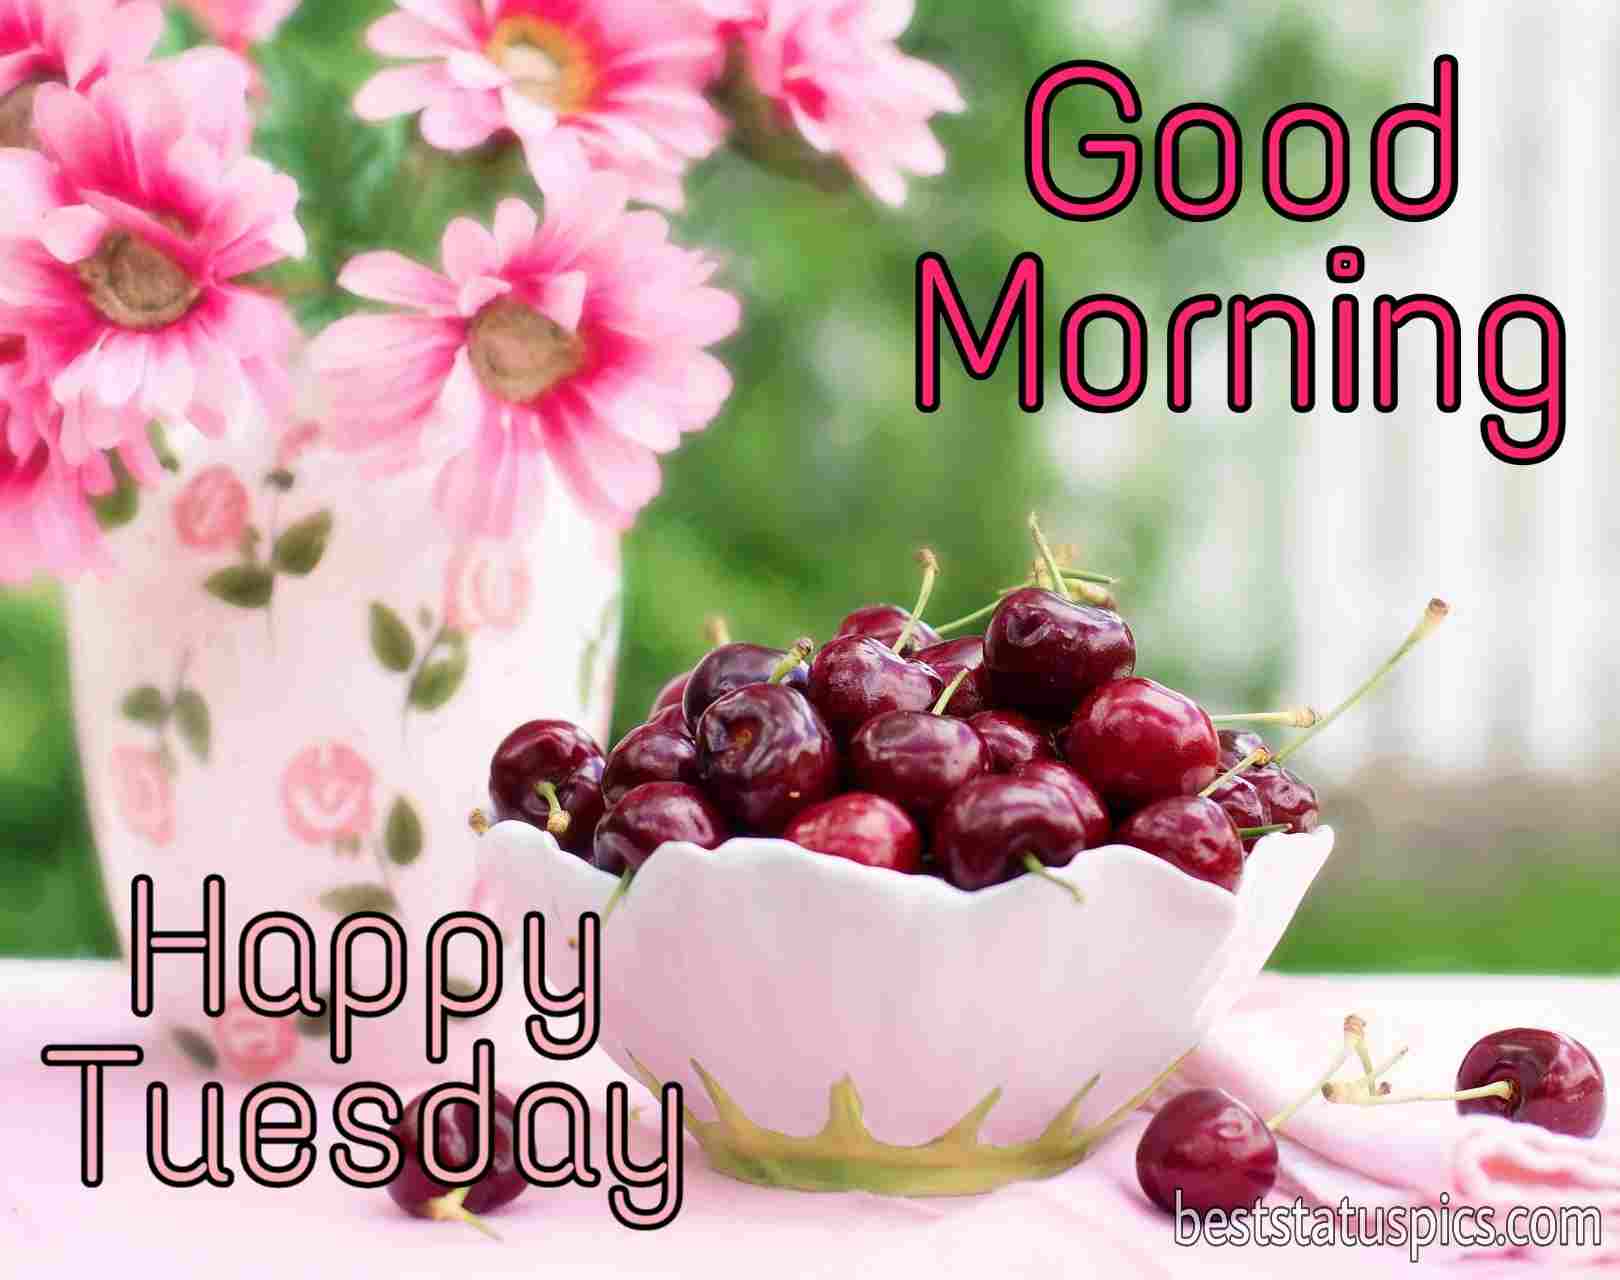 53+ Good Morning Happy Tuesday Images HD, Wishes [2021] Best Status Pics